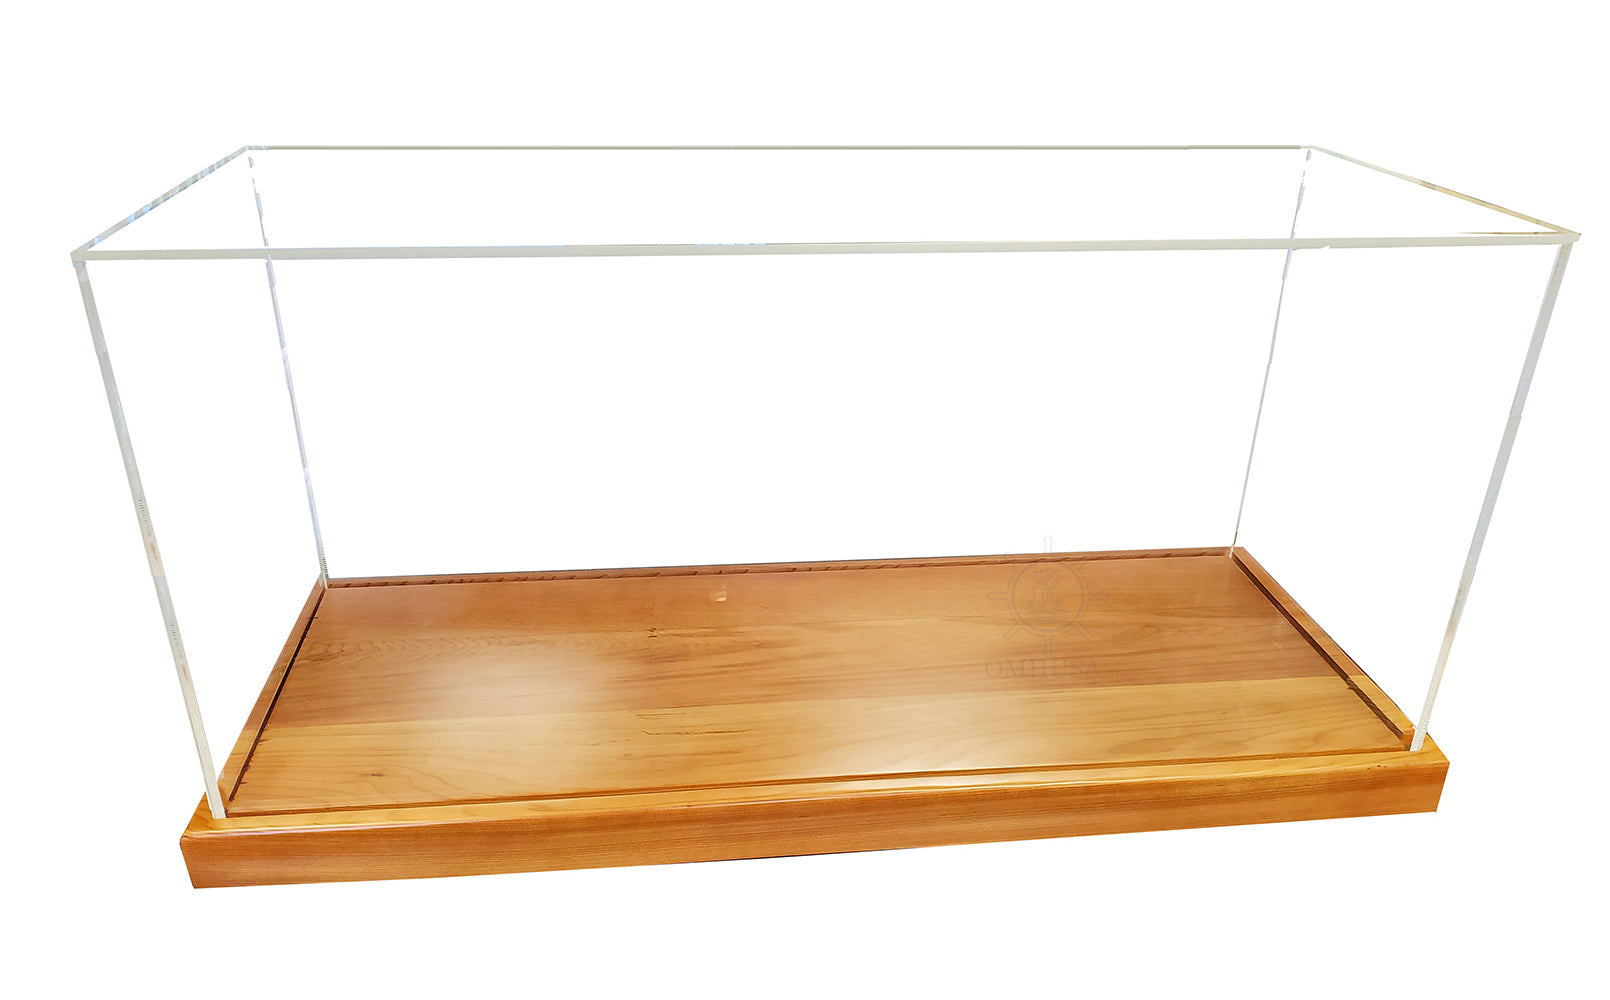 ALDO Creative Arts Collectibles Scale Model L: 27.75 W: 11.375 H: 13.25 Inches / NEW / Plexiglass Display Case Midsize  Plexiglass Panels Table Top Cabinet with Wood Base for  Speed Boat Models